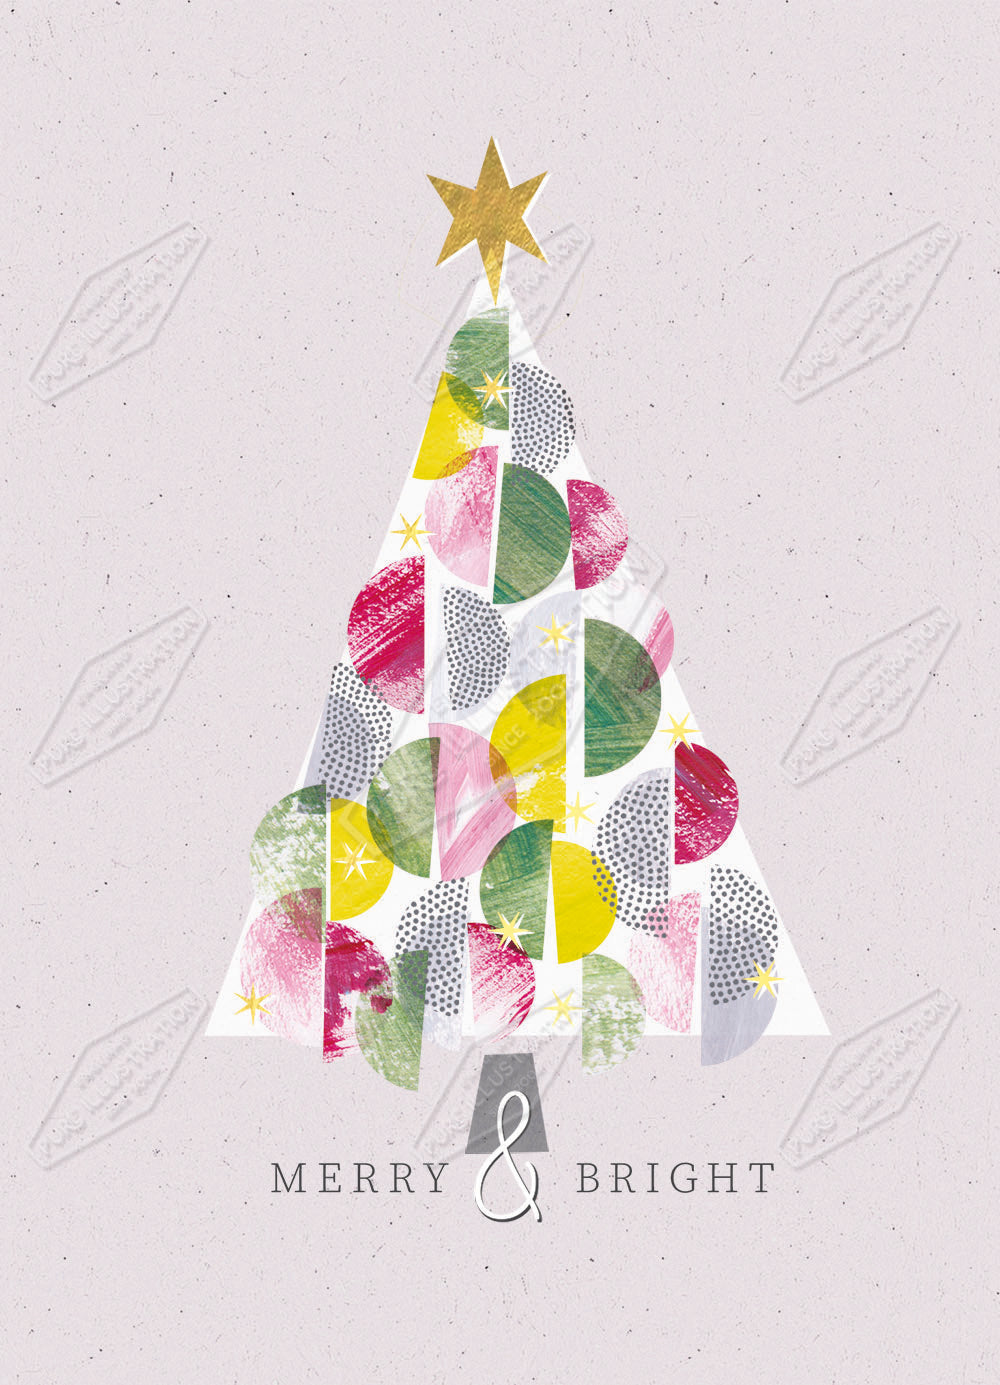 00030188SLA- Sarah Lake is represented by Pure Art Licensing Agency - Christmas Greeting Card Design